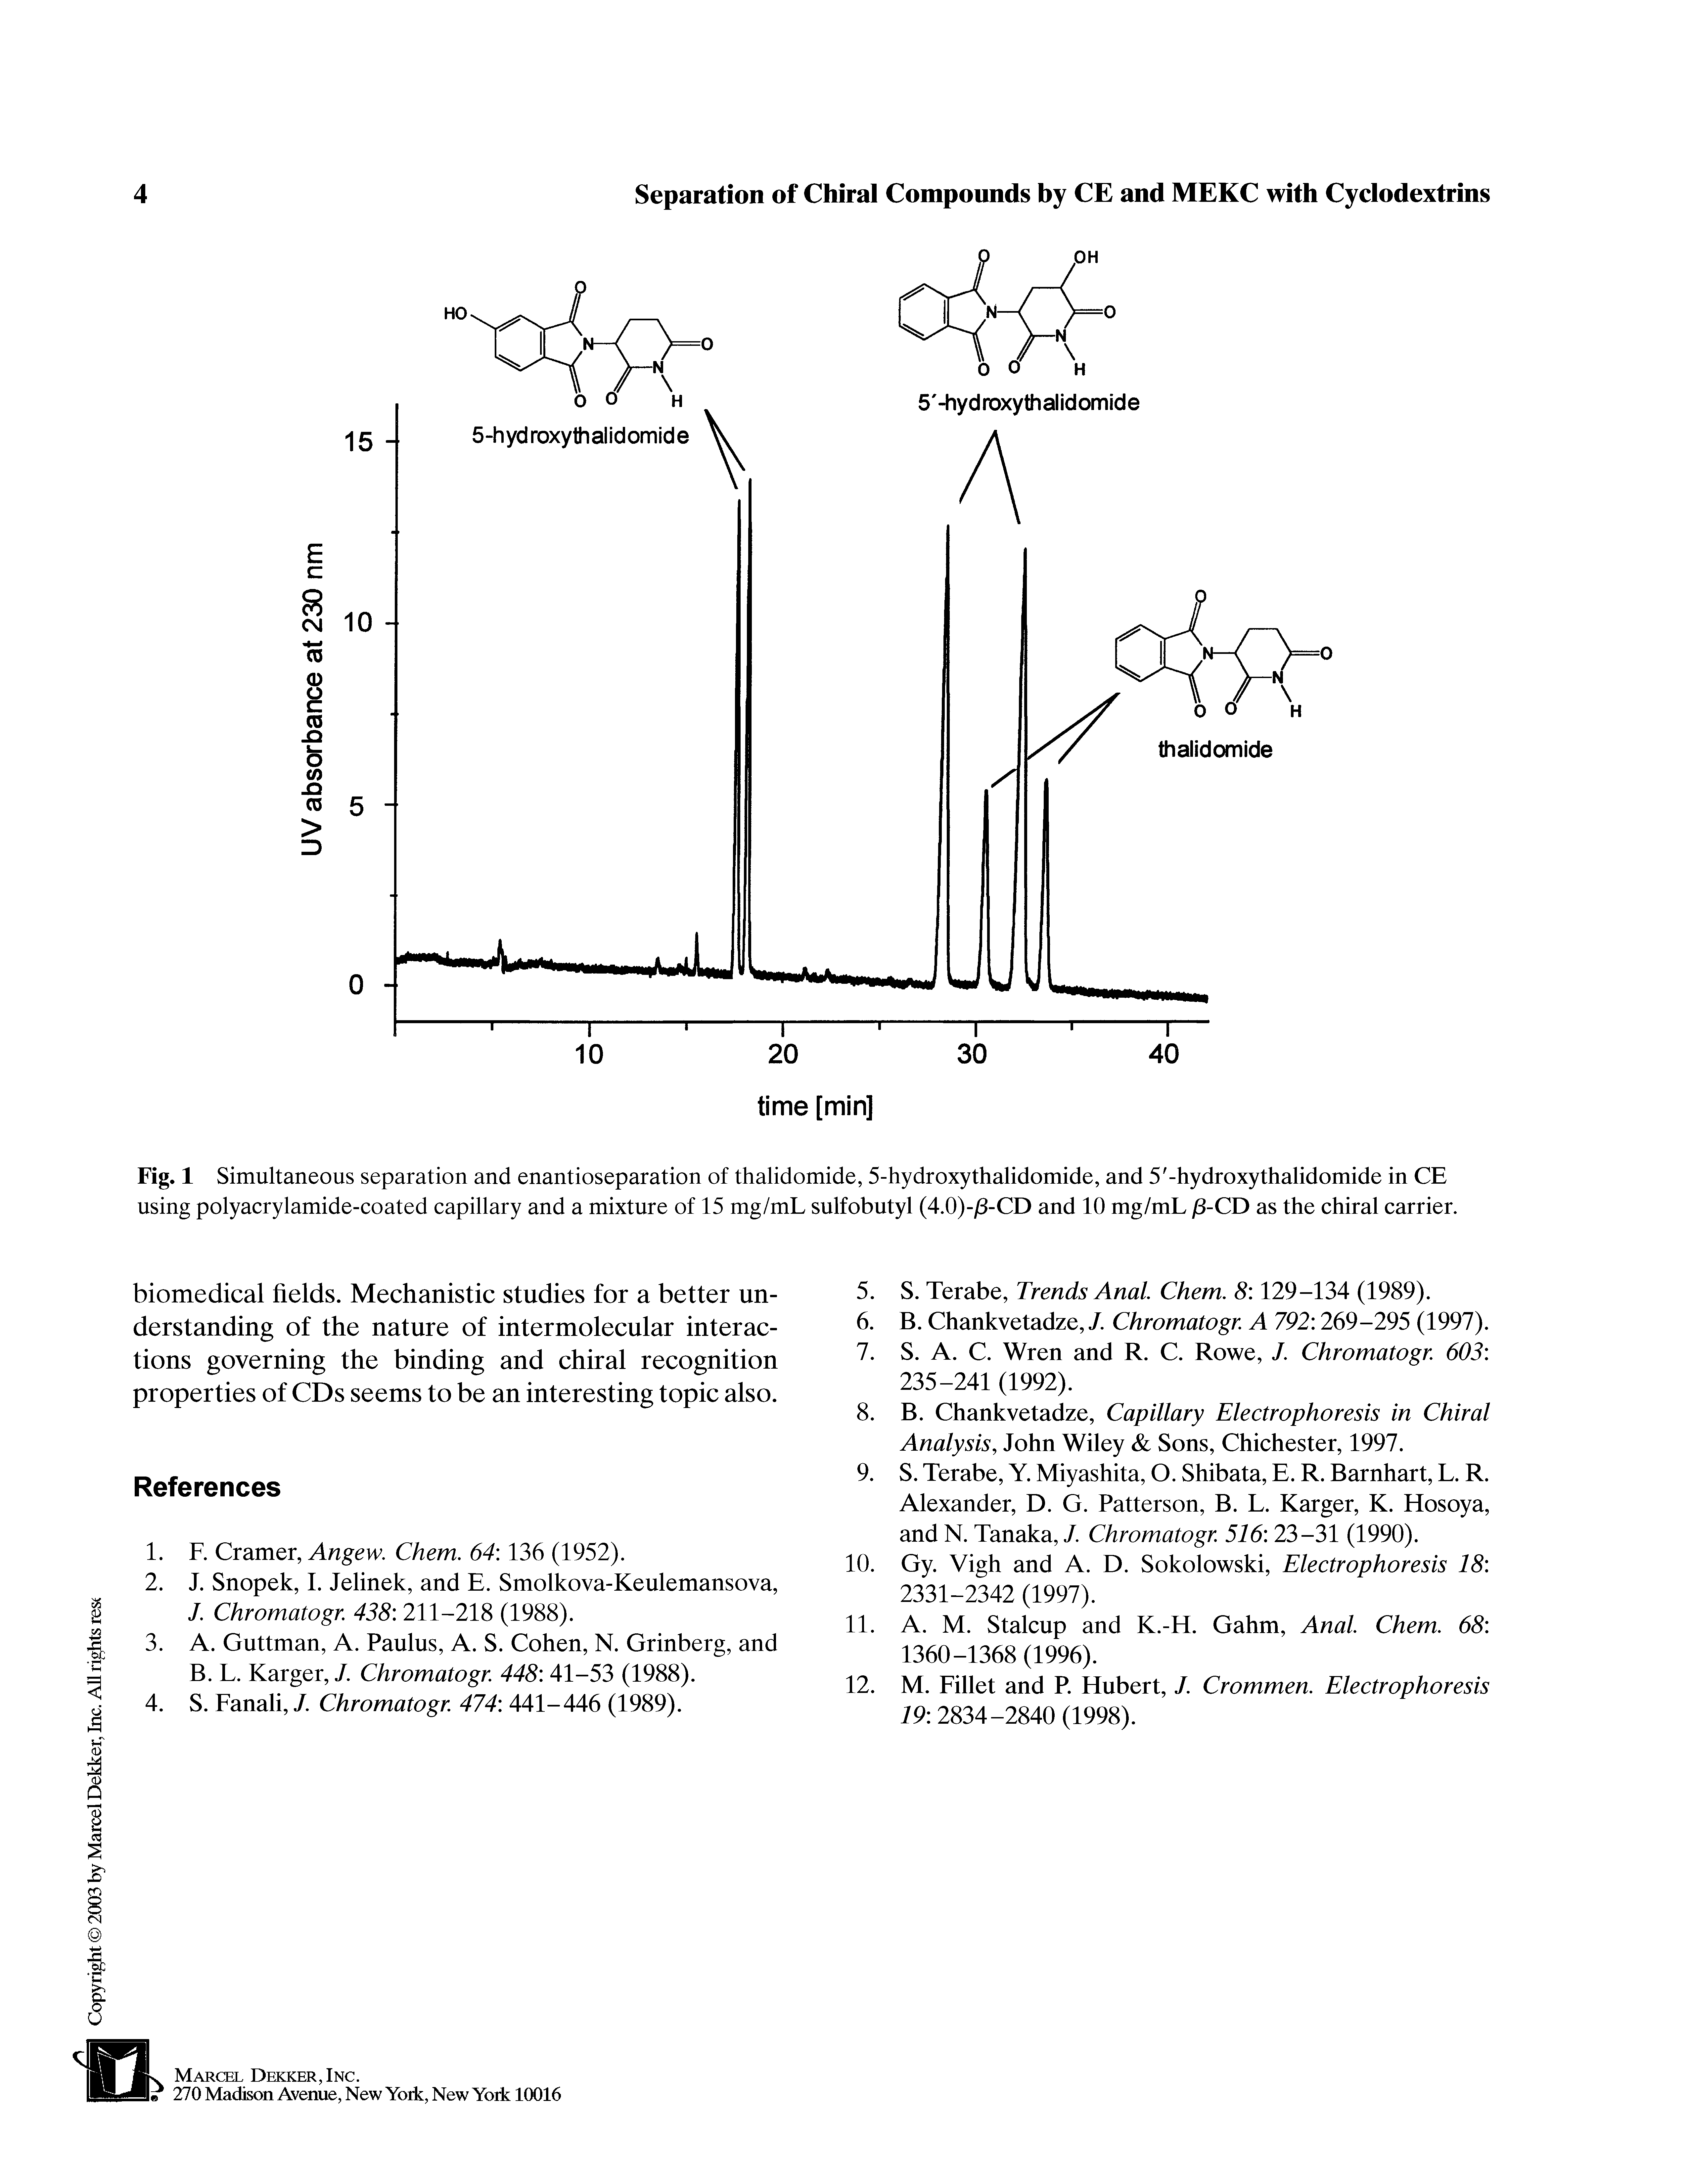 Fig. 1 Simultaneous separation and enantioseparation of thalidomide, 5-hydroxythalidomide, and 5 -hydroxythalidomide in CE using polyacrylamide-coated capillary and a mixture of 15 mg/mL sulfobutyl (4.0)-/3-CD and 10 mg/mL (3-CD as the chiral carrier.